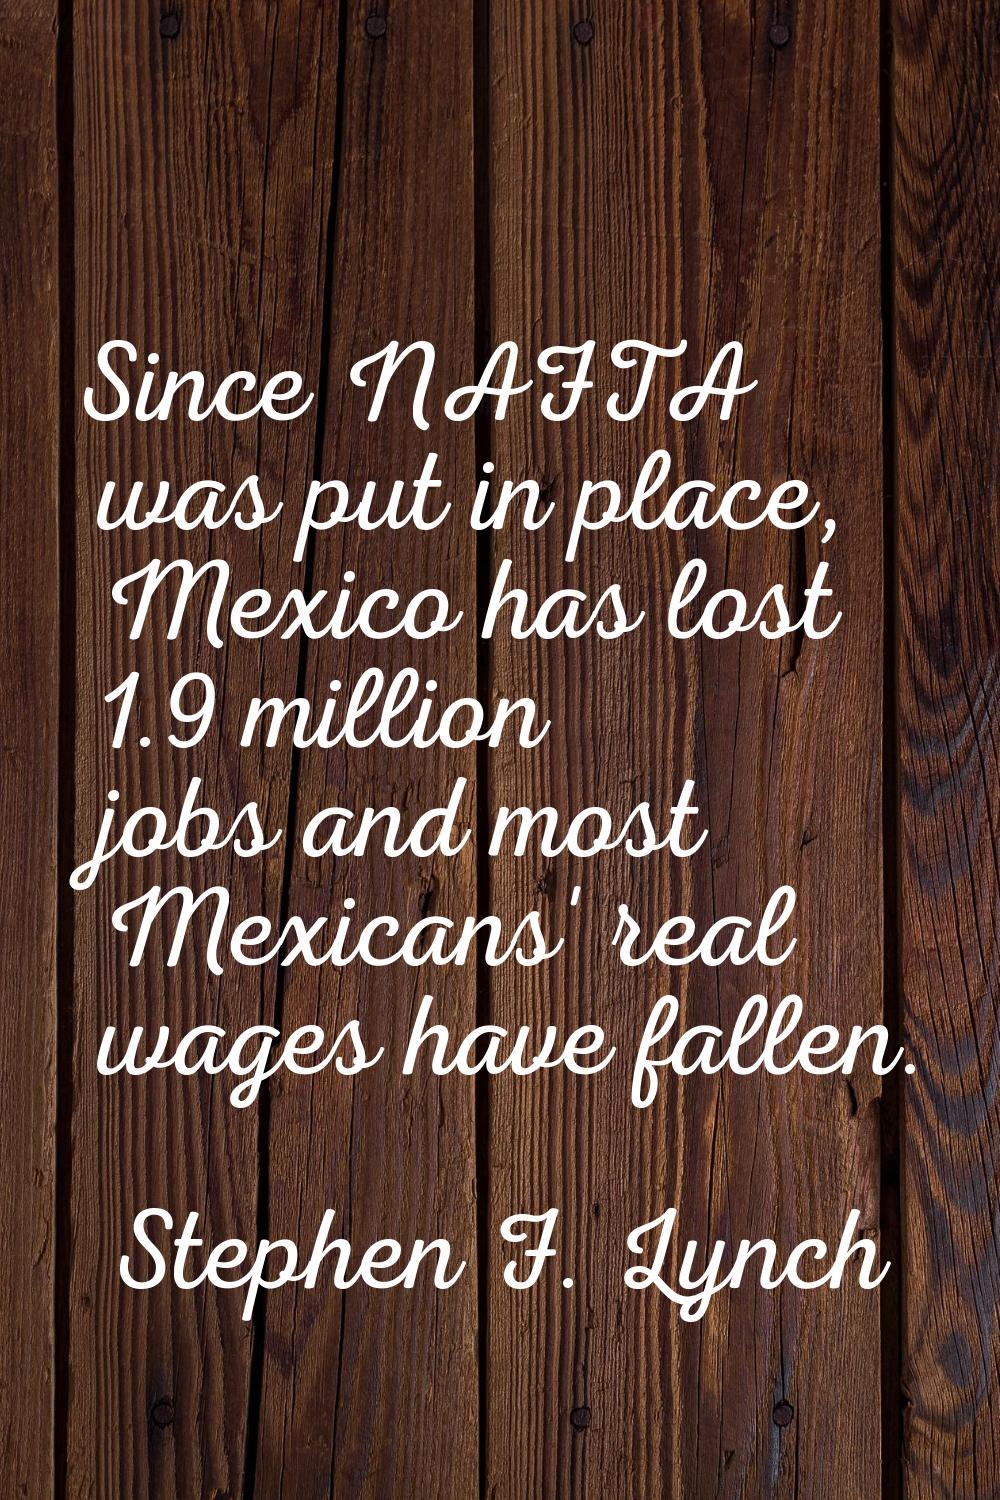 Since NAFTA was put in place, Mexico has lost 1.9 million jobs and most Mexicans' real wages have f